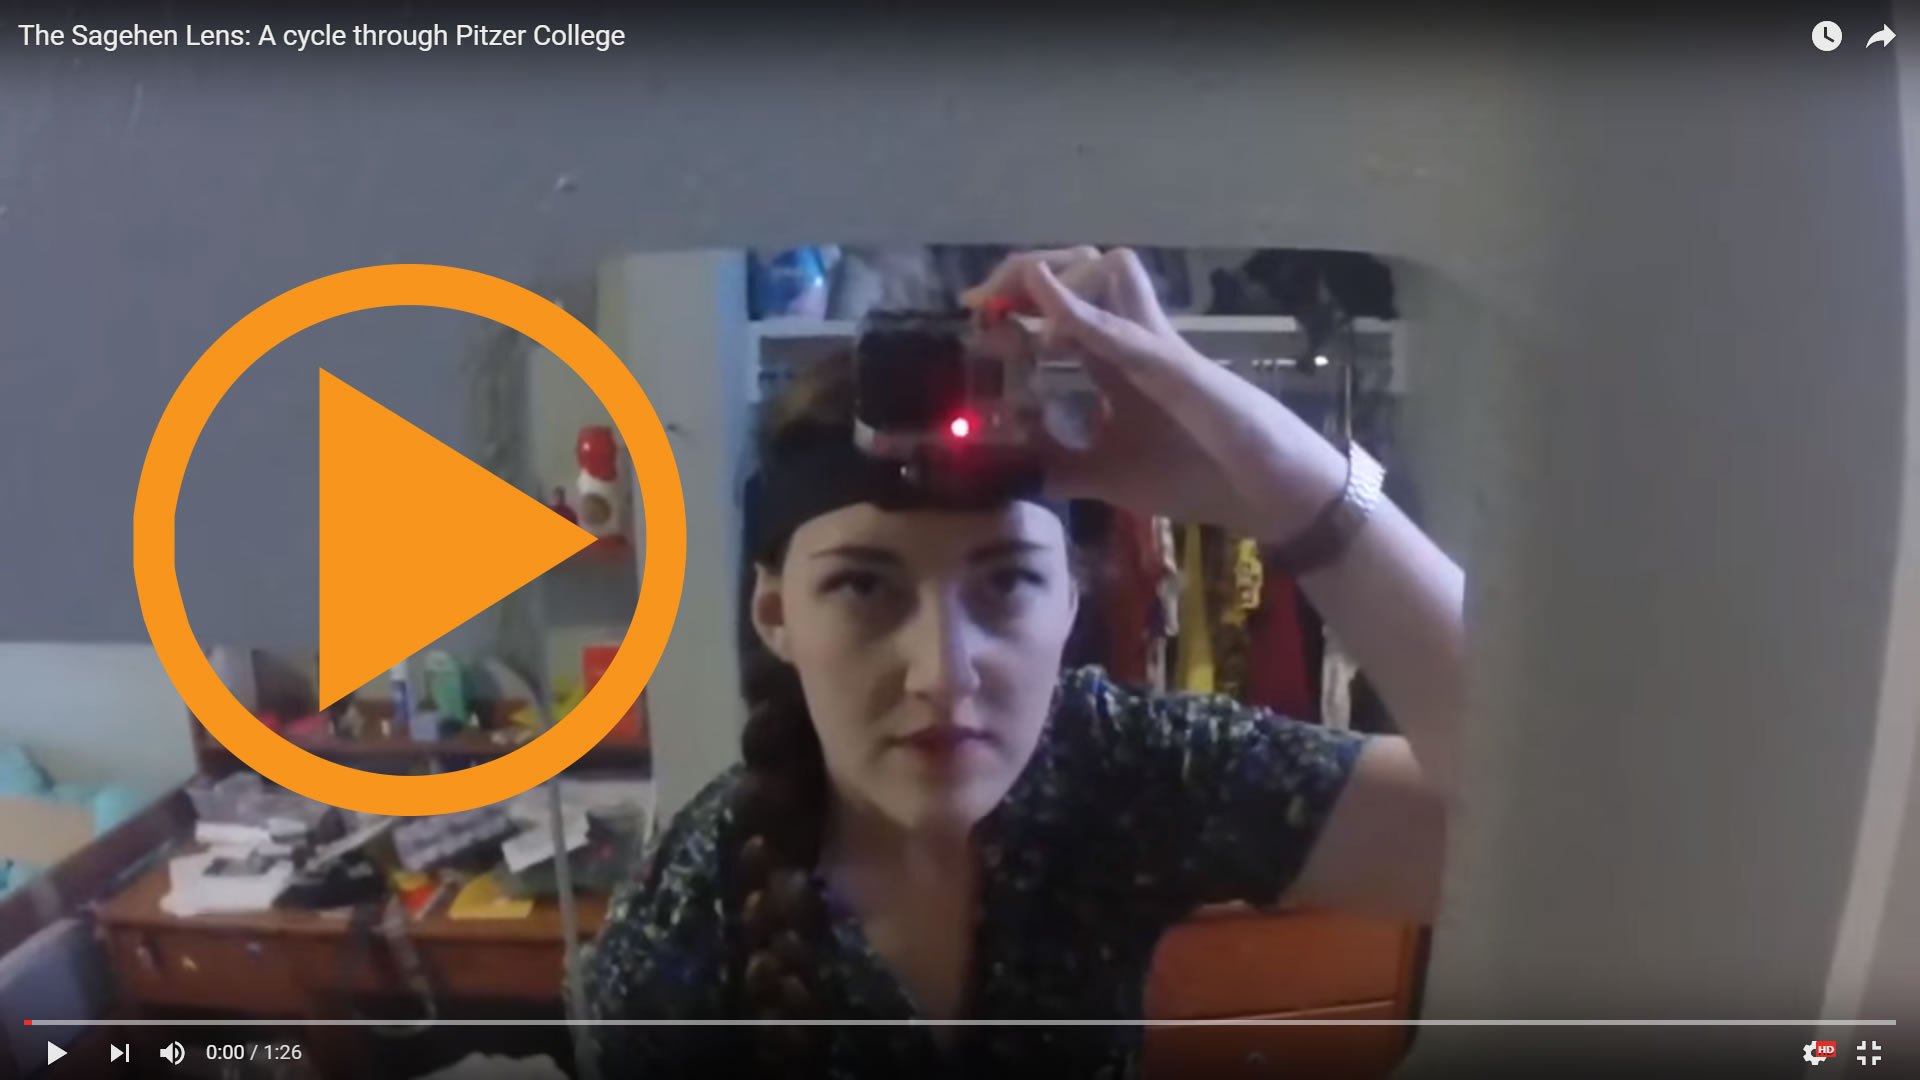 Video: A Sagehen Lens: A Cycle through Pitzer College